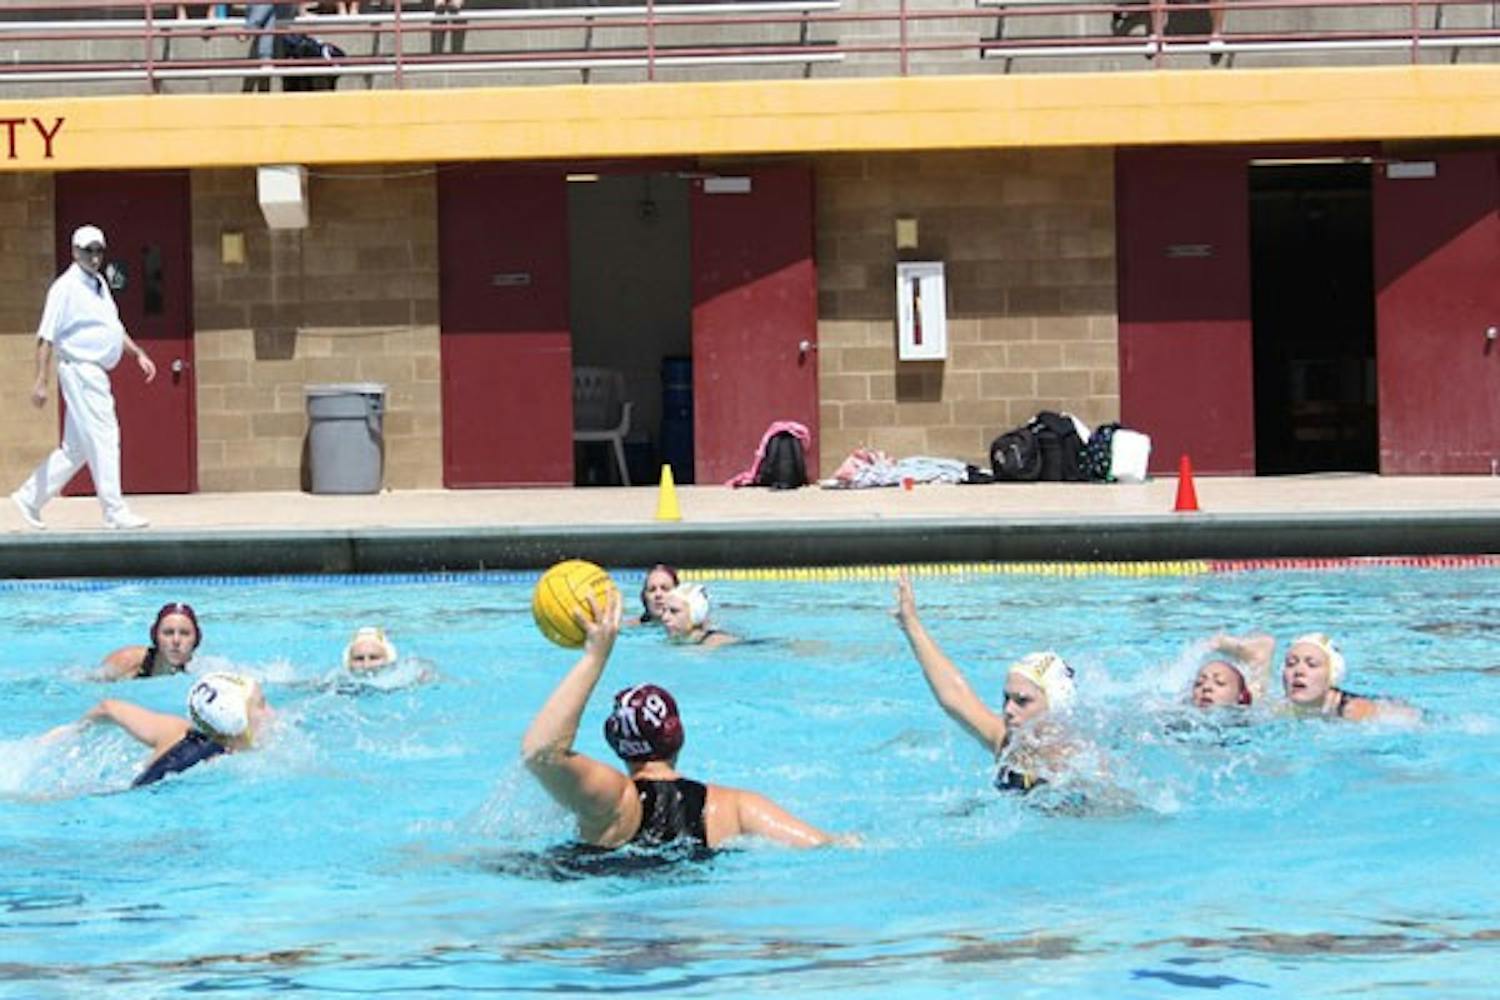 TOURNAMENT TIME: Sophomore attacker Annabelle Carter fires a pass during ASU's 14-11 loss to California earlier this month. The Sun Devils will face Stanford in the first round of the MPSF Tournament in Los Angeles. (Photo by Jessica Weisel)